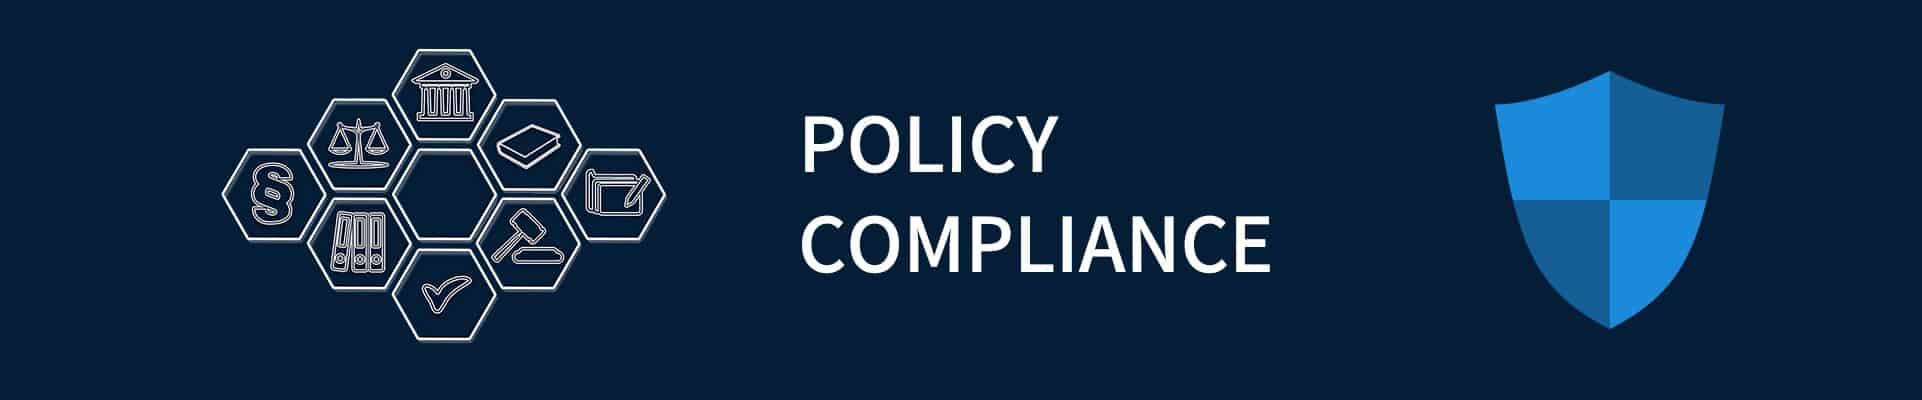 POLICY COMPLIANCE